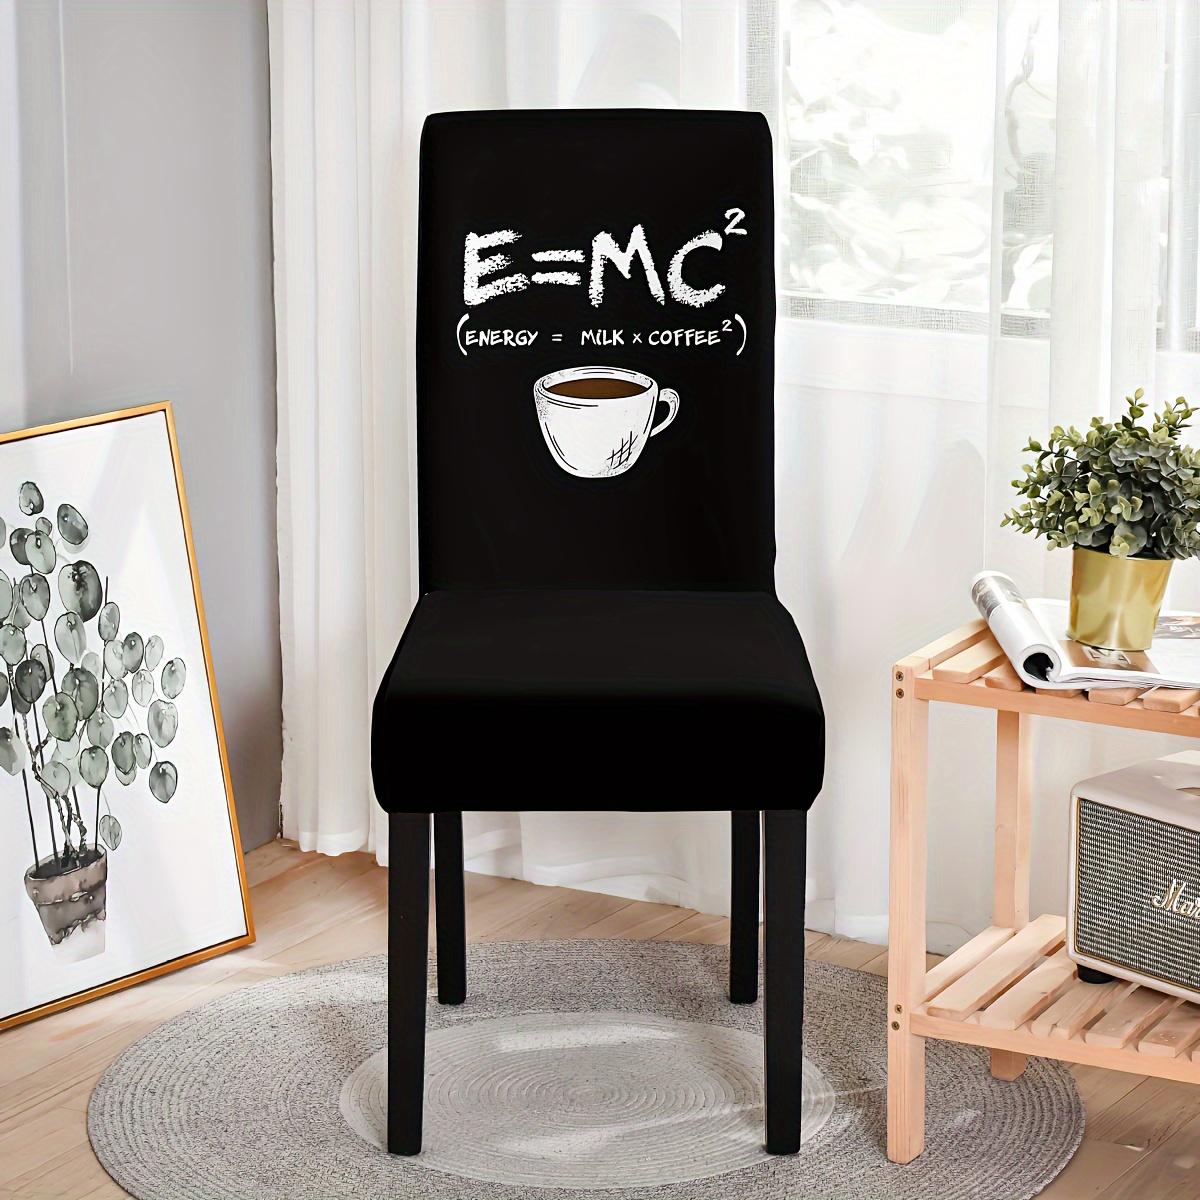 

4/6pcs Set Black Letter Print Dining Chair Covers - Stretchy, Washable Slipcovers For Home Decor - Perfect For Dining, Kitchen, Office, And Parties